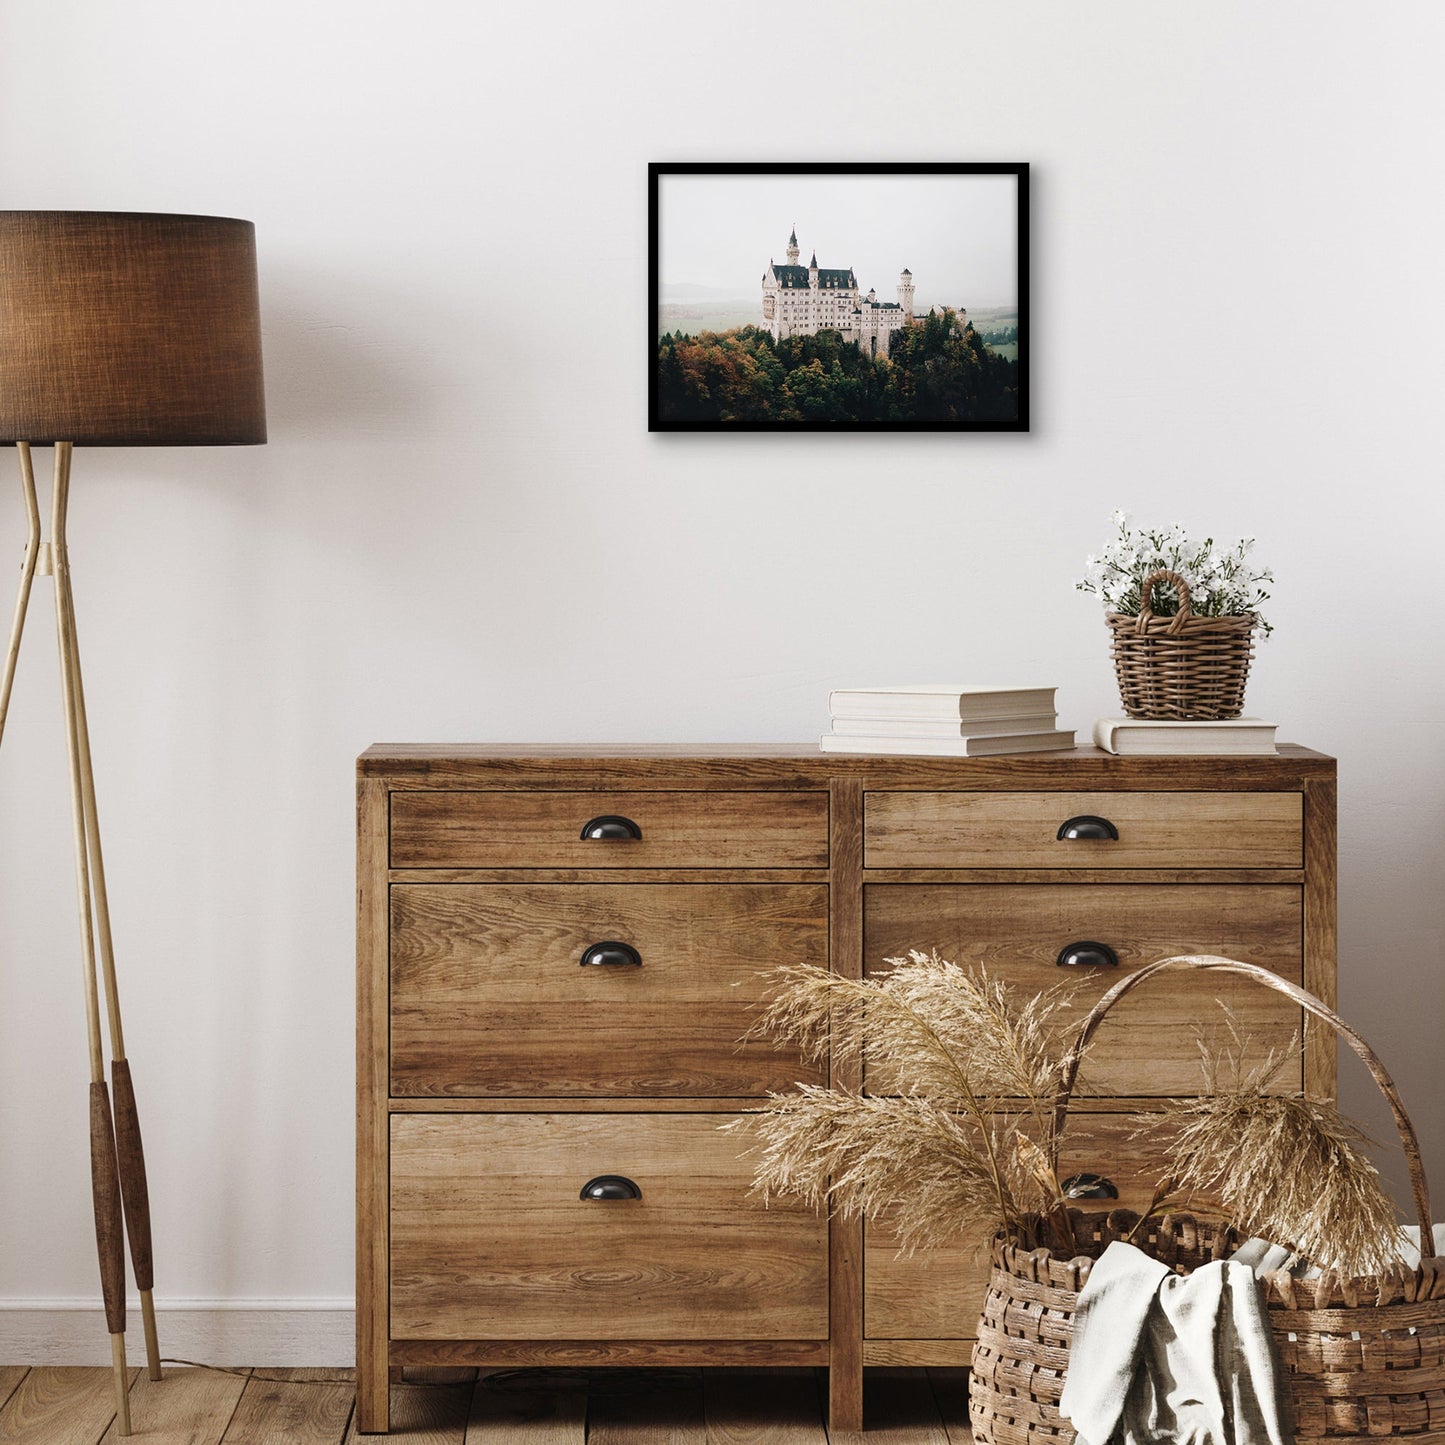 Modern Wall Hanging Picture Frame In Black For Horizontal Or Vertical Photo Display Formats